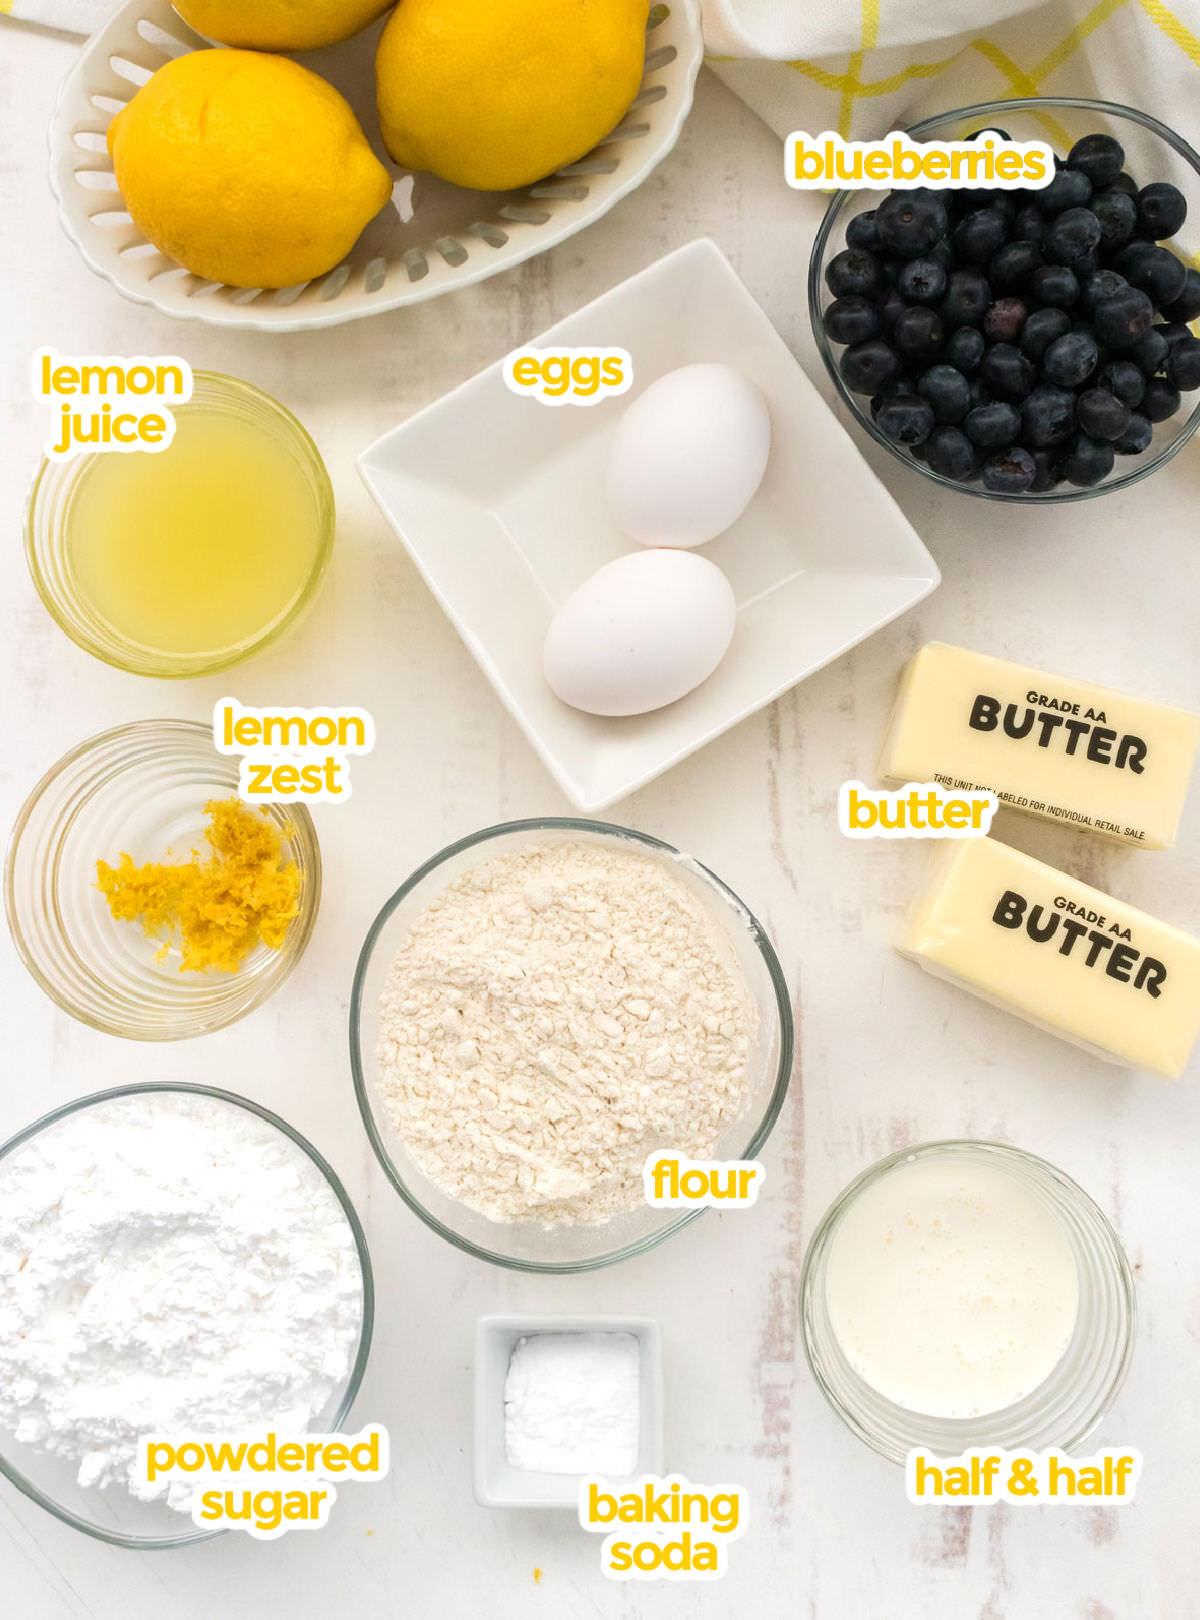 All the ingredients you will need to make Lemon Blueberry Cookies including butter, powdered sugar, eggs, lemon juice, lemon zest, Half & Half, Flour, Baking Soda and Fresh Blueberries.